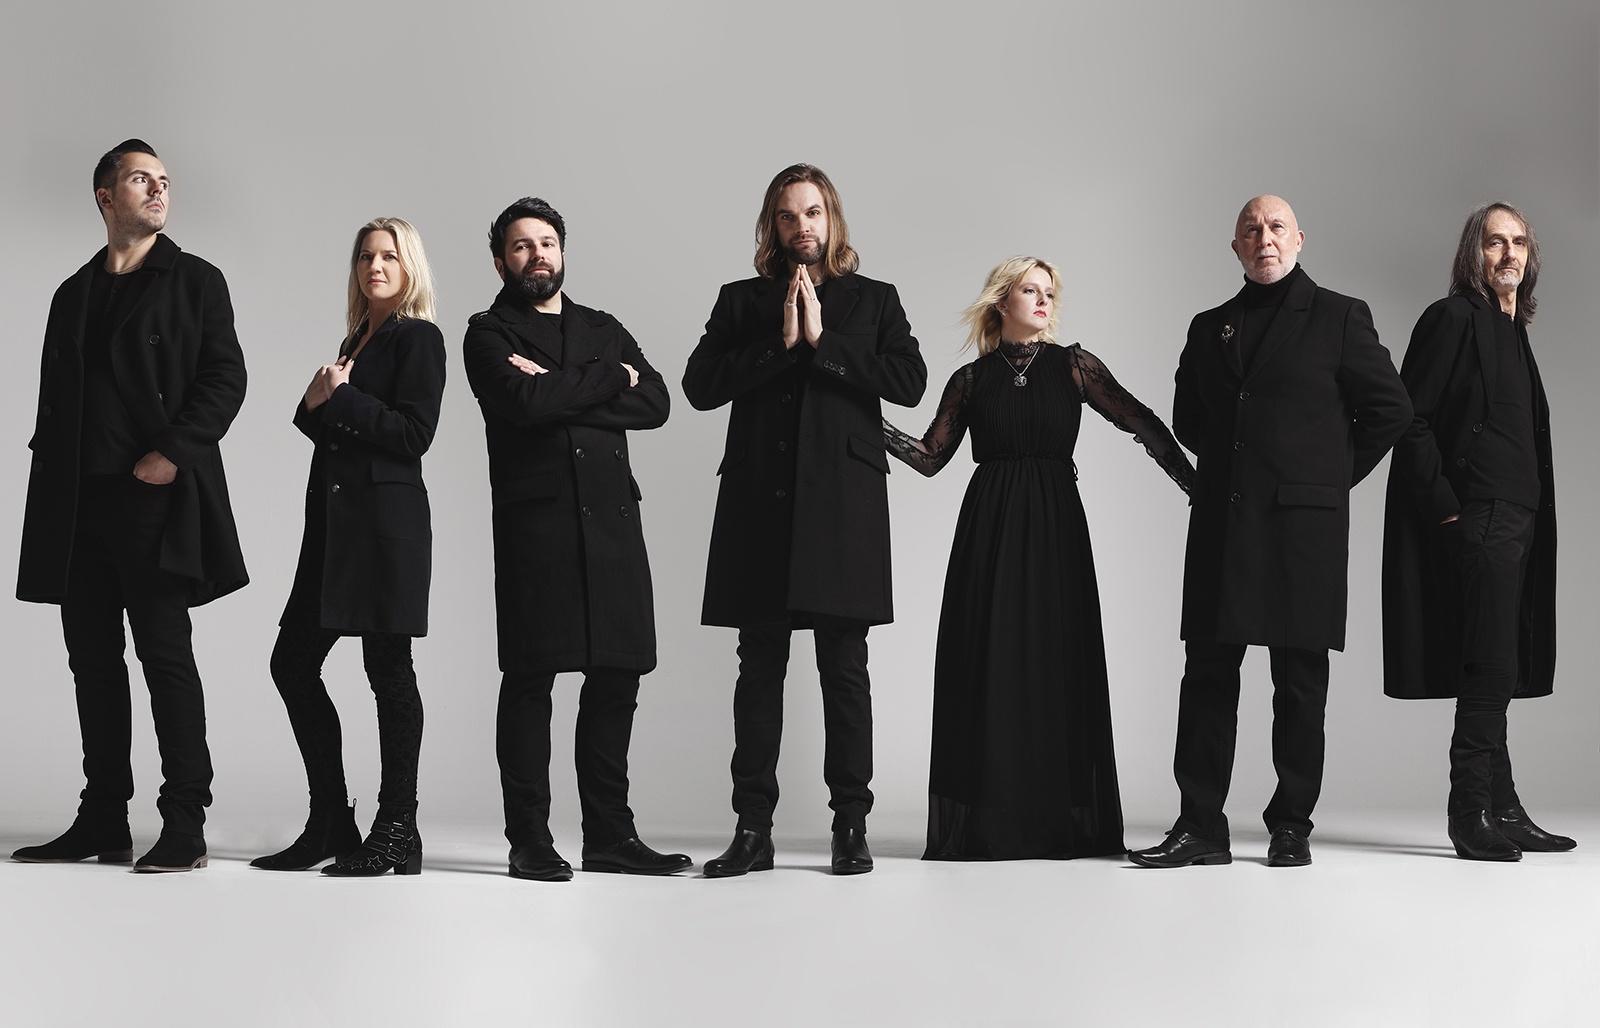 Band members dressed in black in various poses on gray background